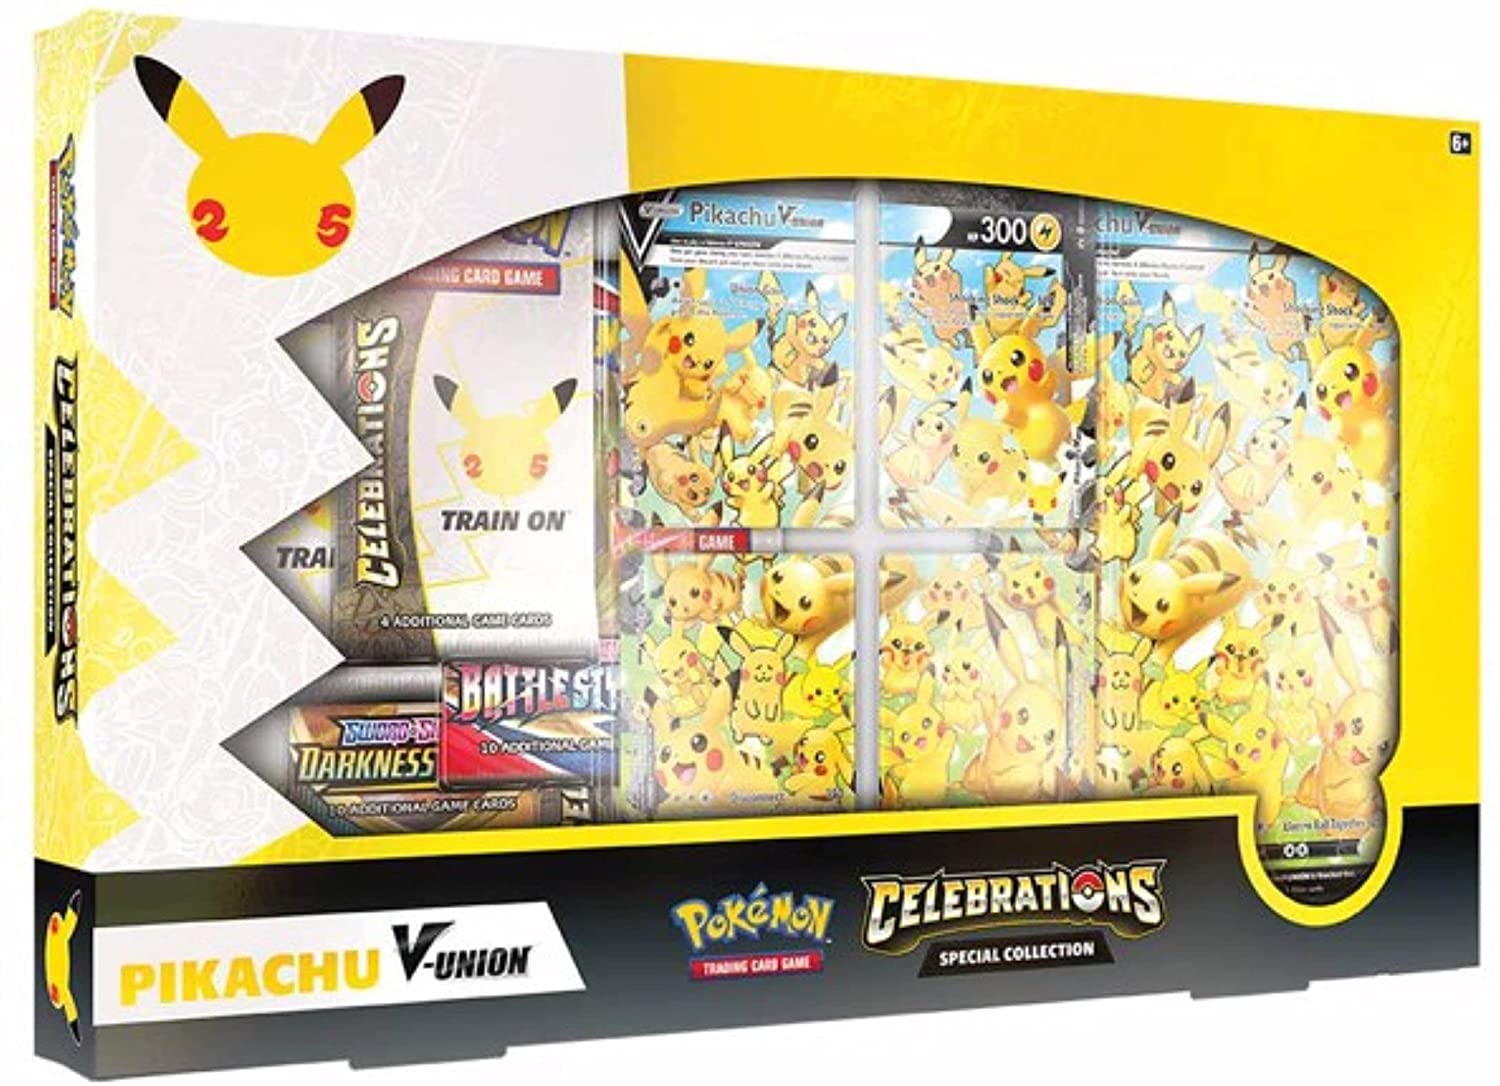 Celebrations Special Collection: Pikachu V-Union | Gamer Loot